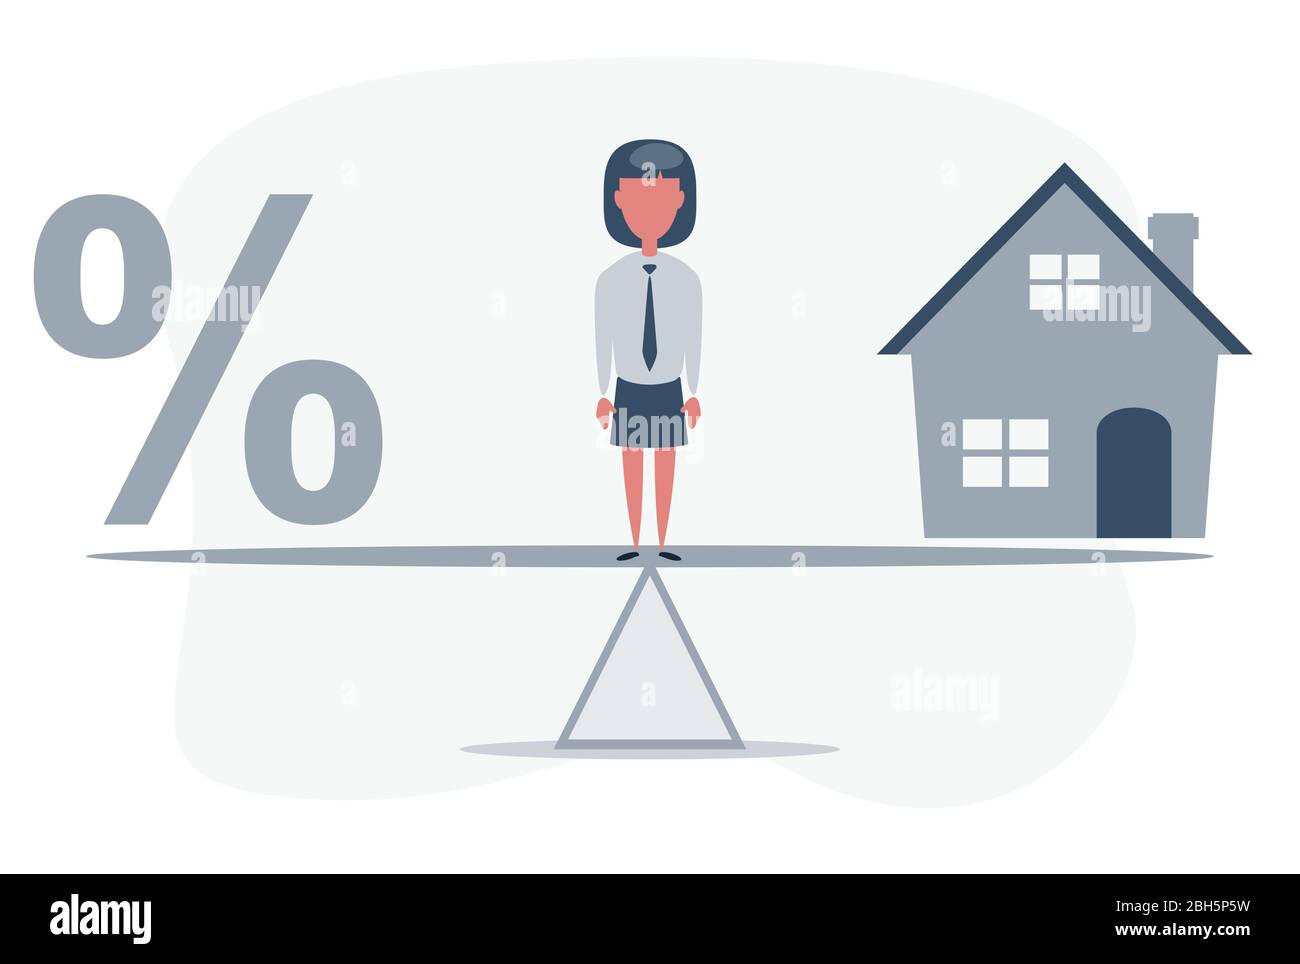 Percentage symbol icon and house scale in equal position. financial management concept depicts short term borrowing for a residence. Stock Vector